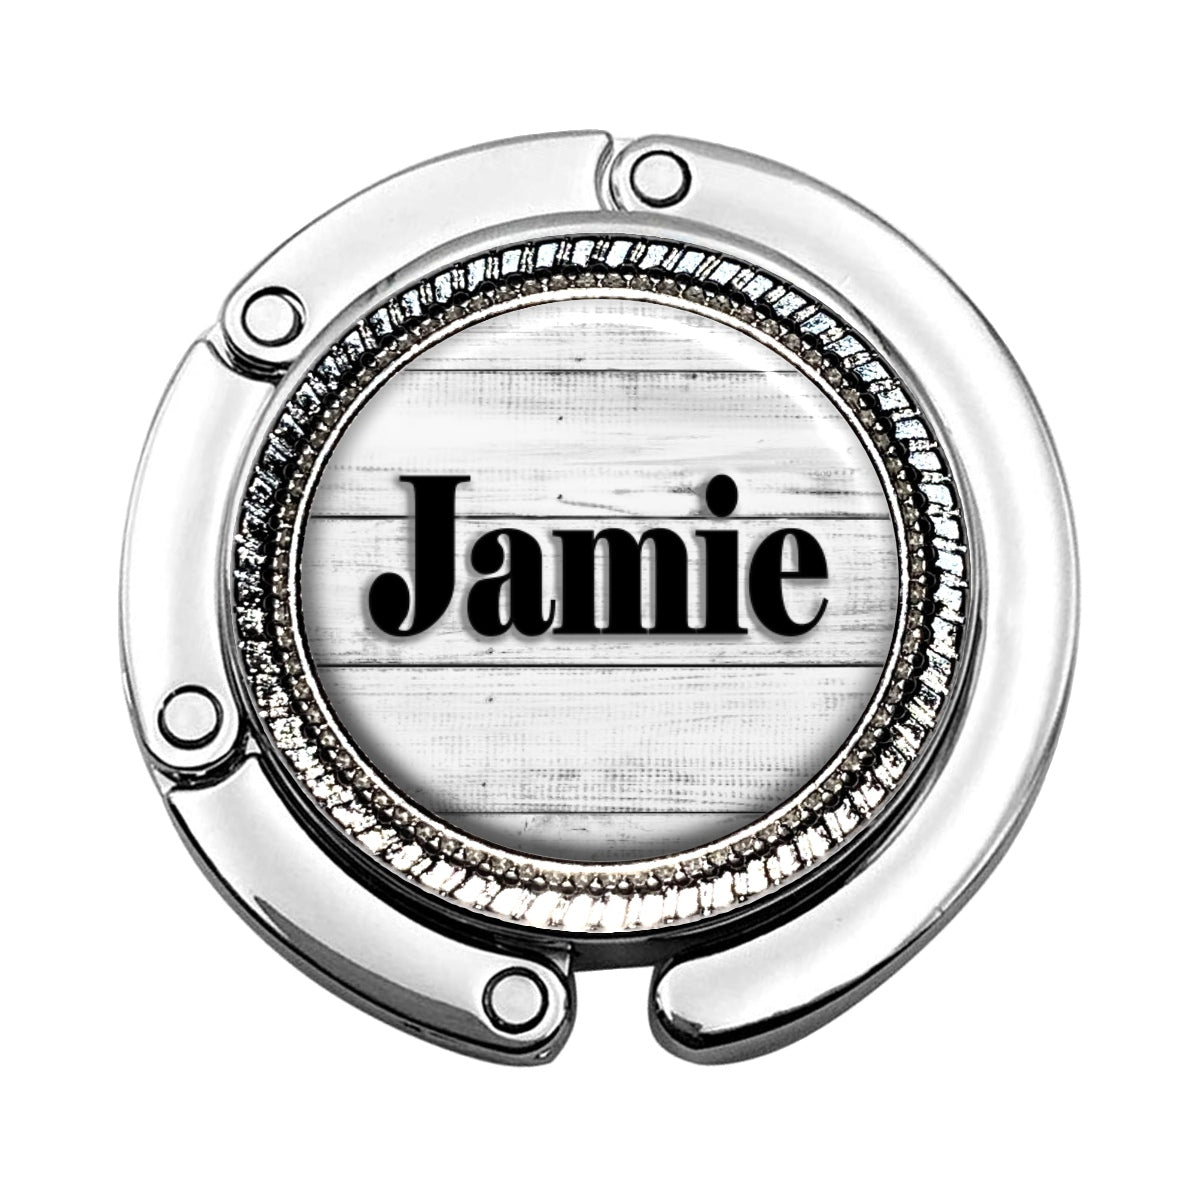 a round metal object with the word jamie on it